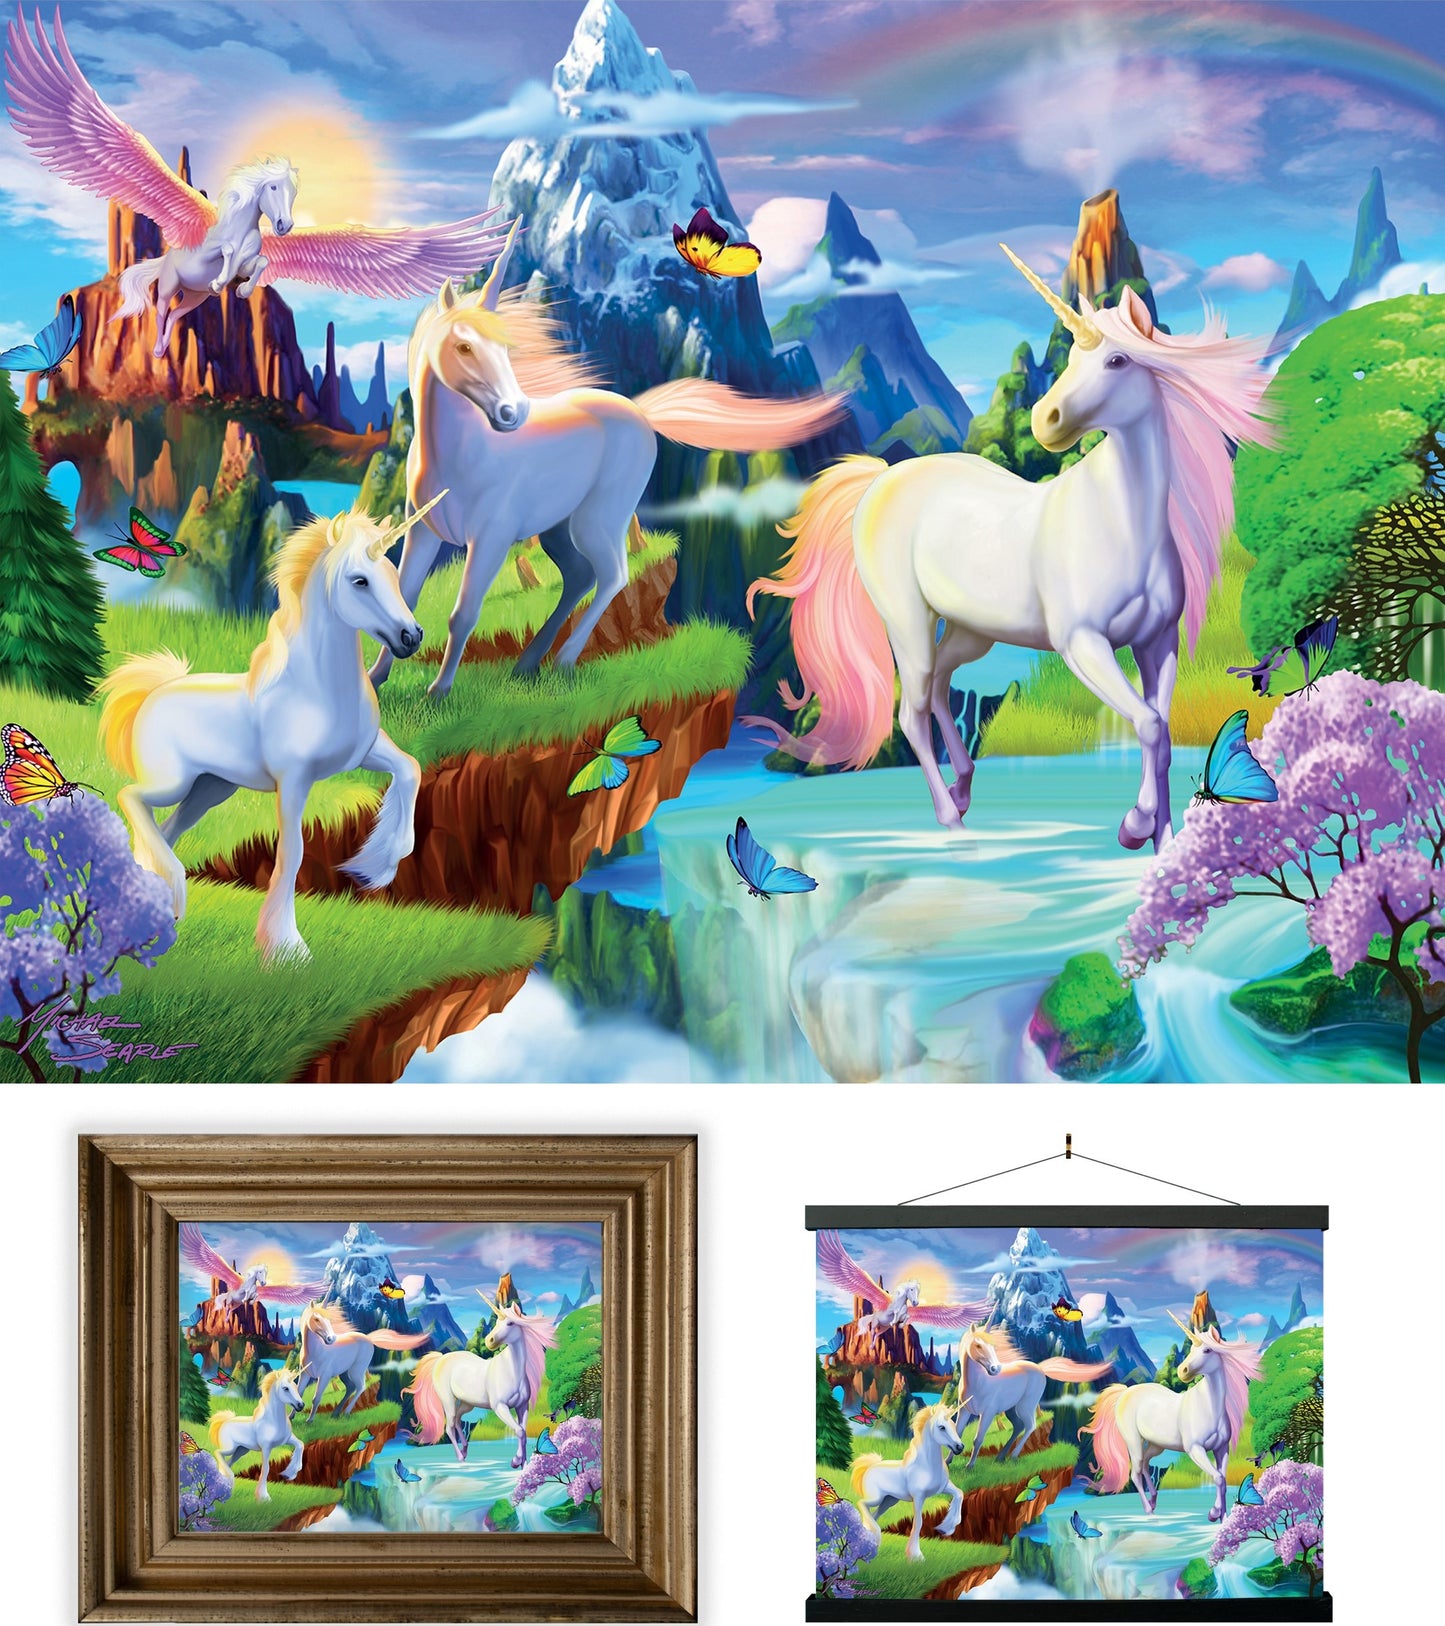 3D LiveLife Pictures - Unicorn Bliss